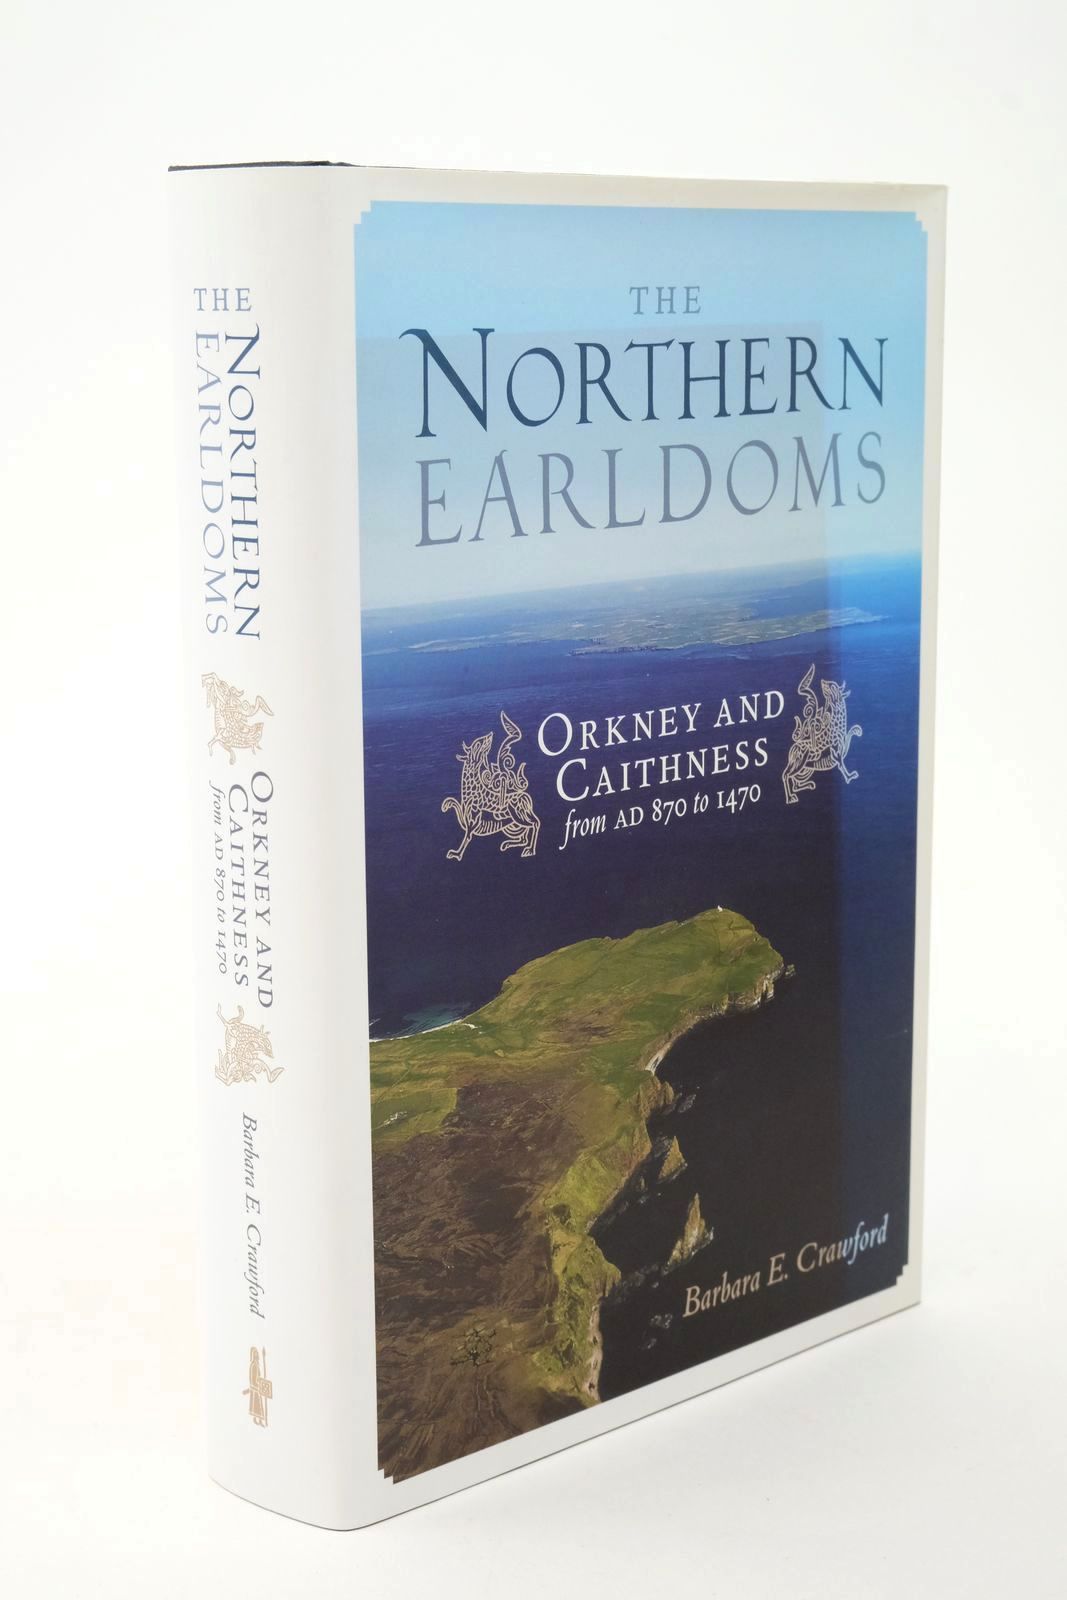 Photo of THE NORTHERN EARLDOMS - ORKNEY AND CAITHNESS FROM AD 870 TO 1470 written by Crawford, Barbara E. published by John Donald (STOCK CODE: 1322597)  for sale by Stella & Rose's Books